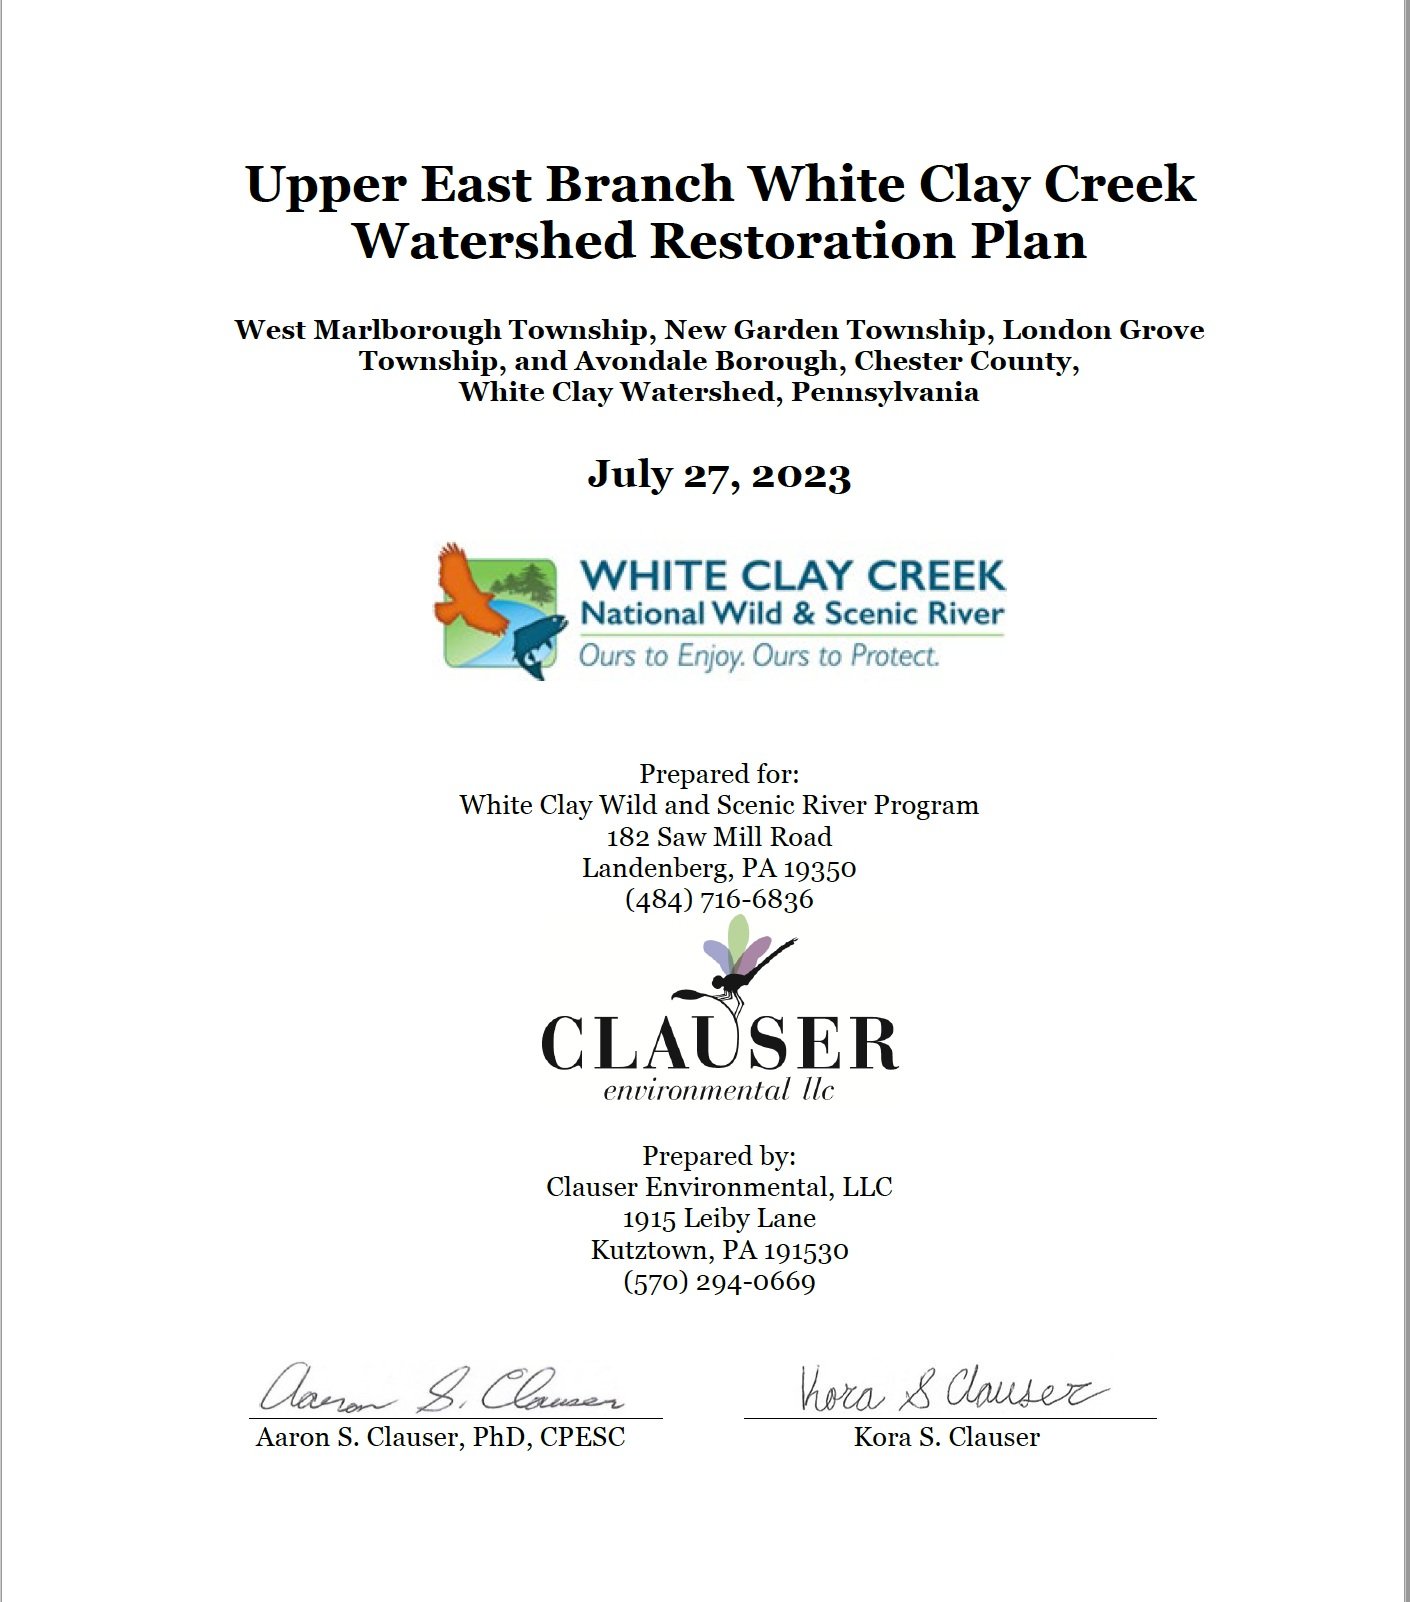 Upper East Branch White Clay Creek Watershed Restoration Plan